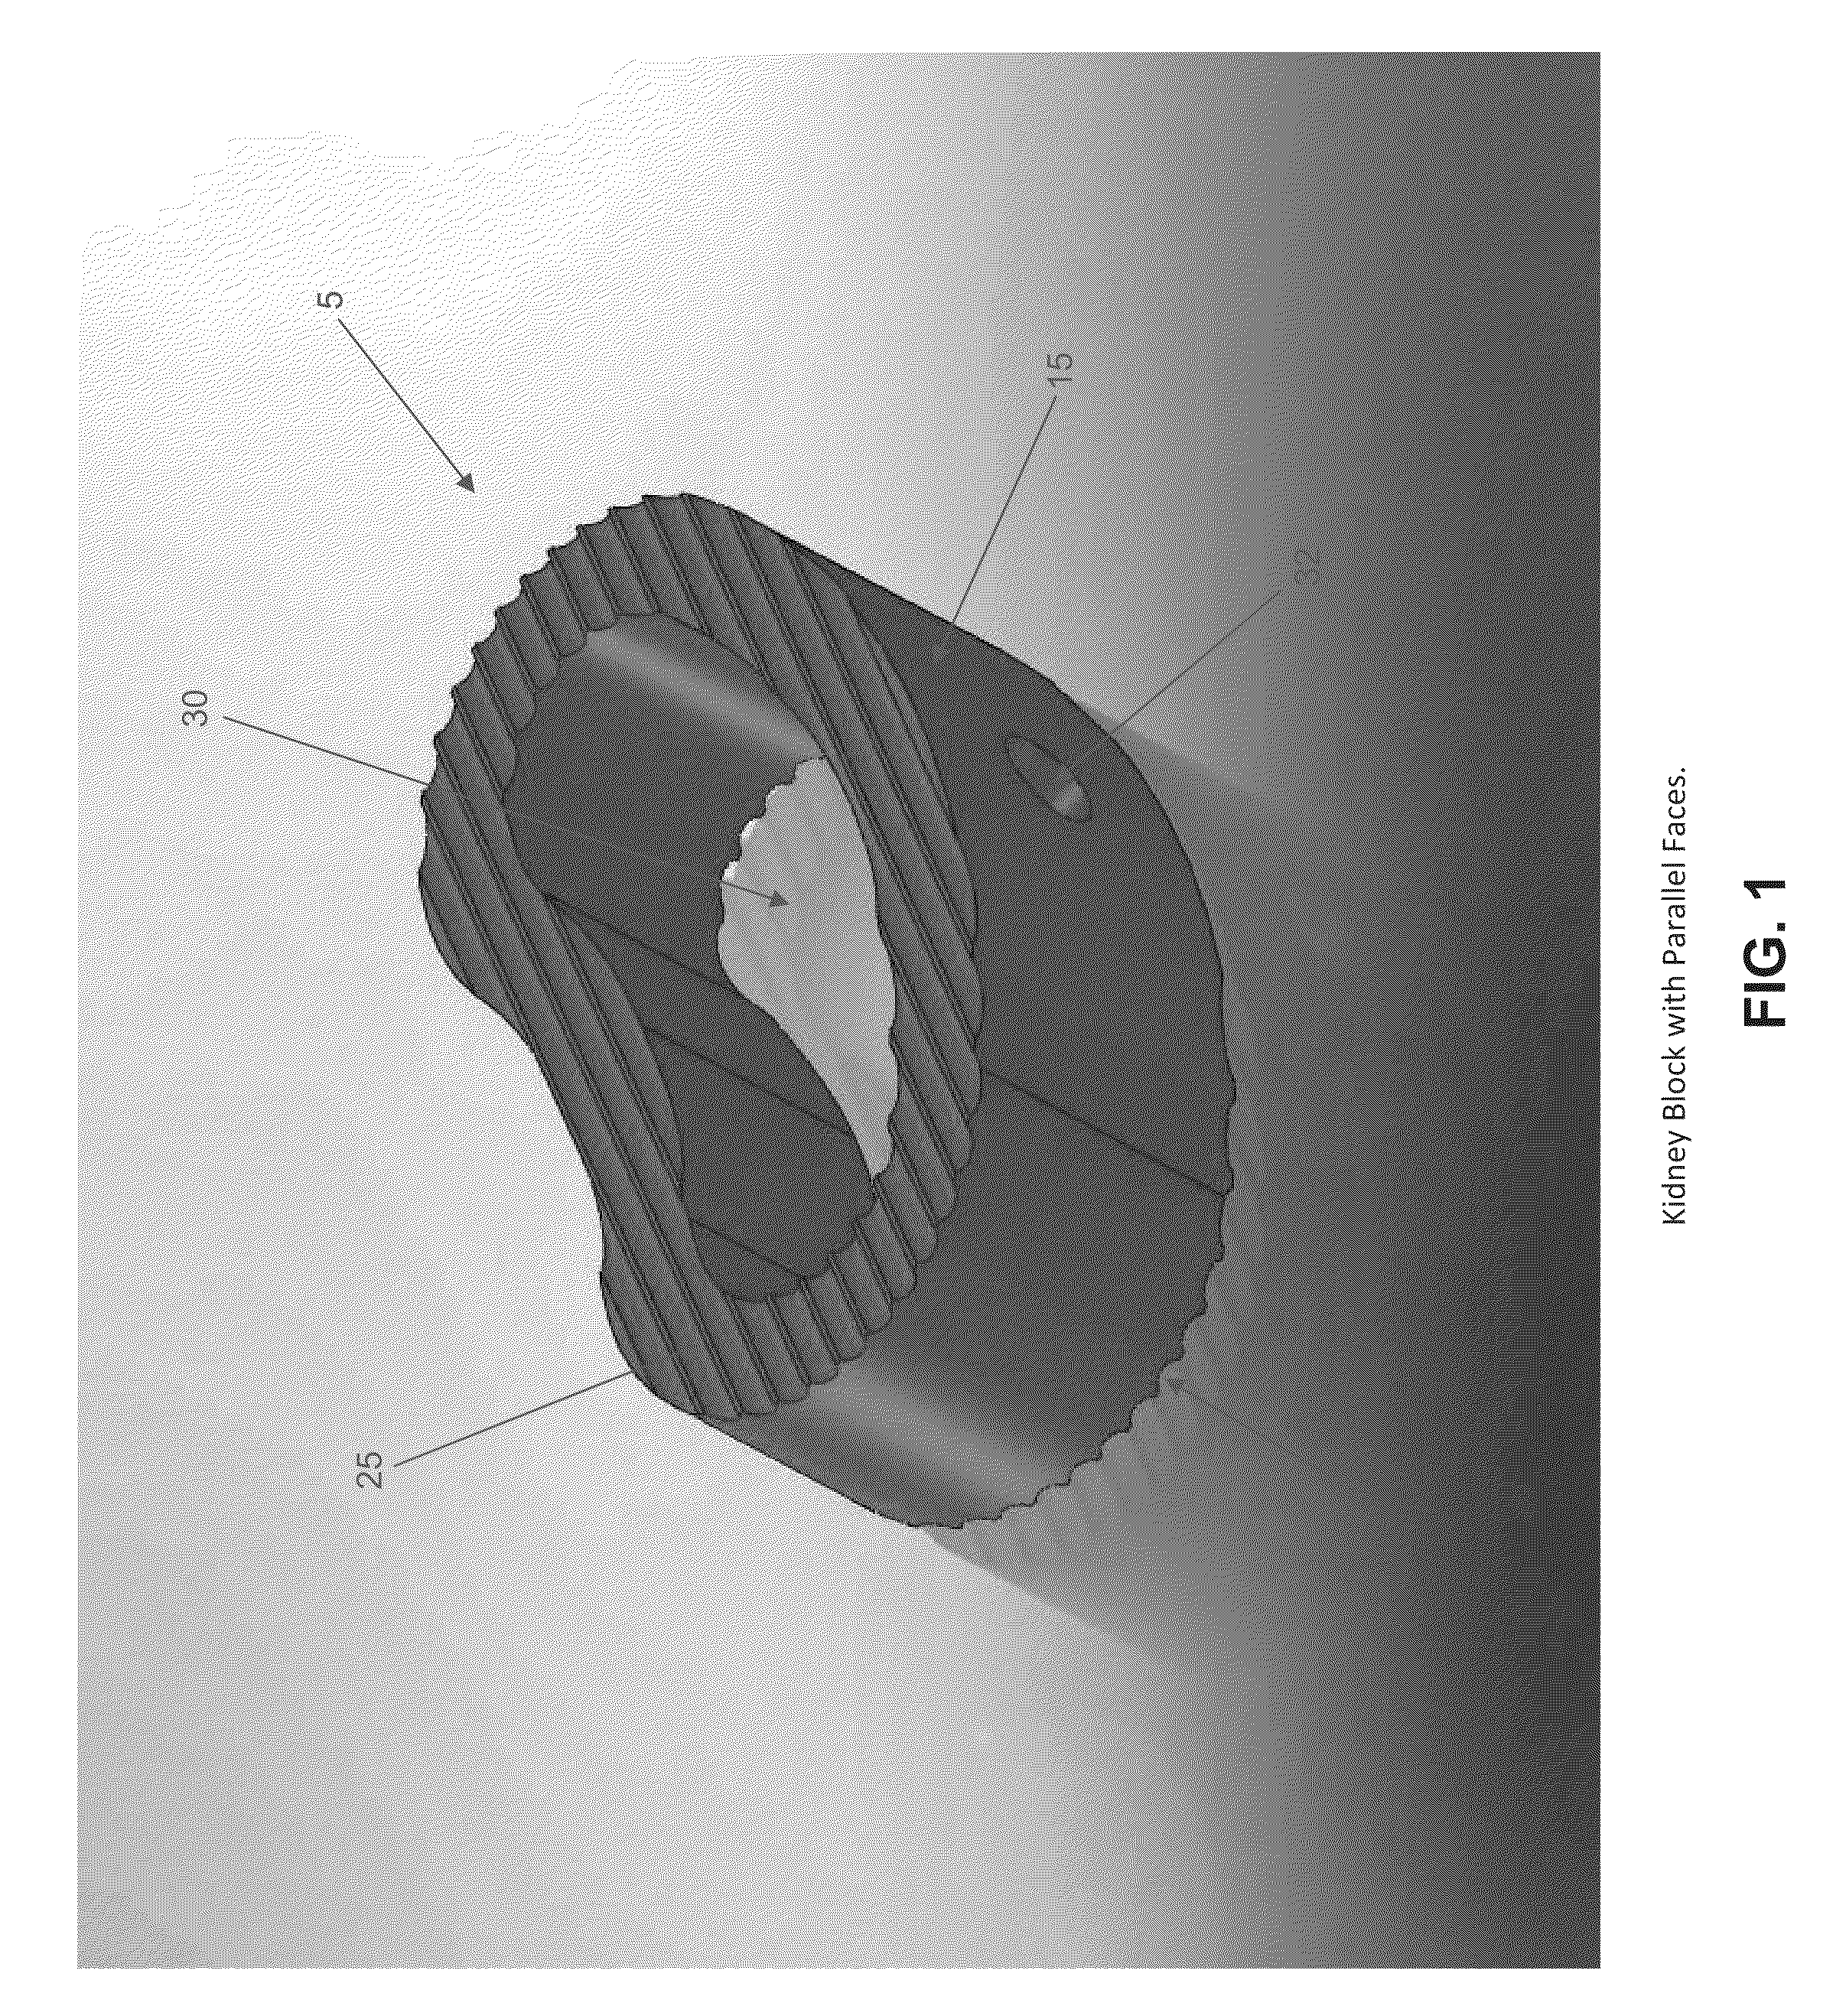 Method and apparatus for fusing the bones of a joint